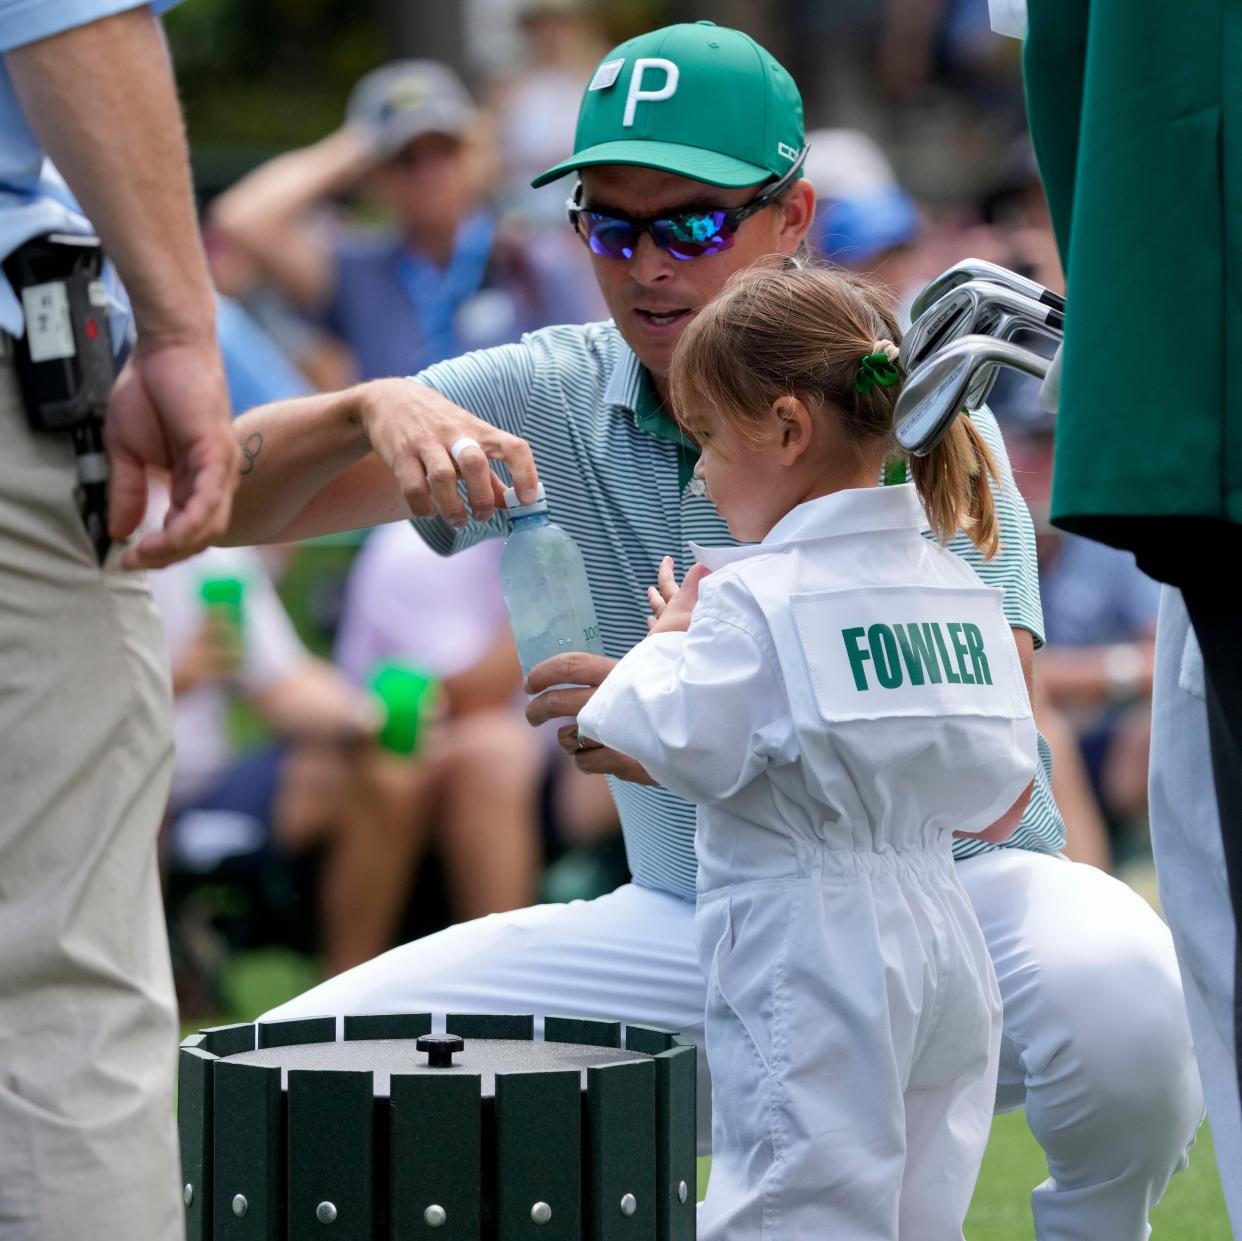 Rickie Fowler gets his daughter, Maya, a bottle of water during the Par 3 Contest at Augusta National Golf Club.